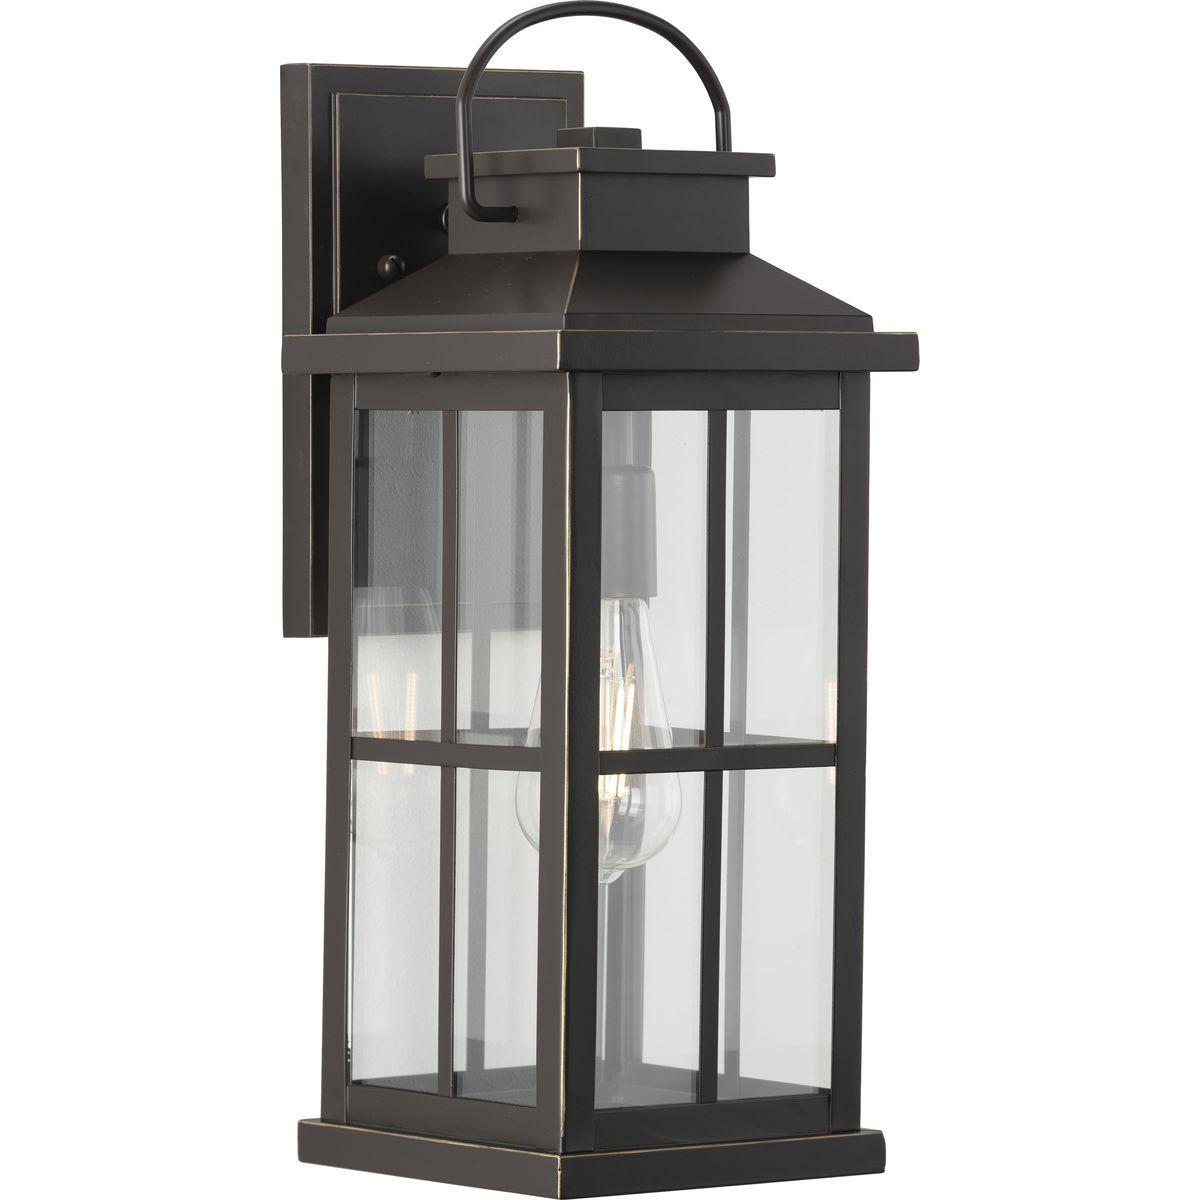 Hubbell P560266-020 Cultivate a timeless aesthetic with the Williamston Collection 1-Light Clear Glass Antique Bronze Farmhouse Outdoor Large Wall Lantern Light. A light source glows from within clear glass panes beneath a traditional windowpane design for classic character.